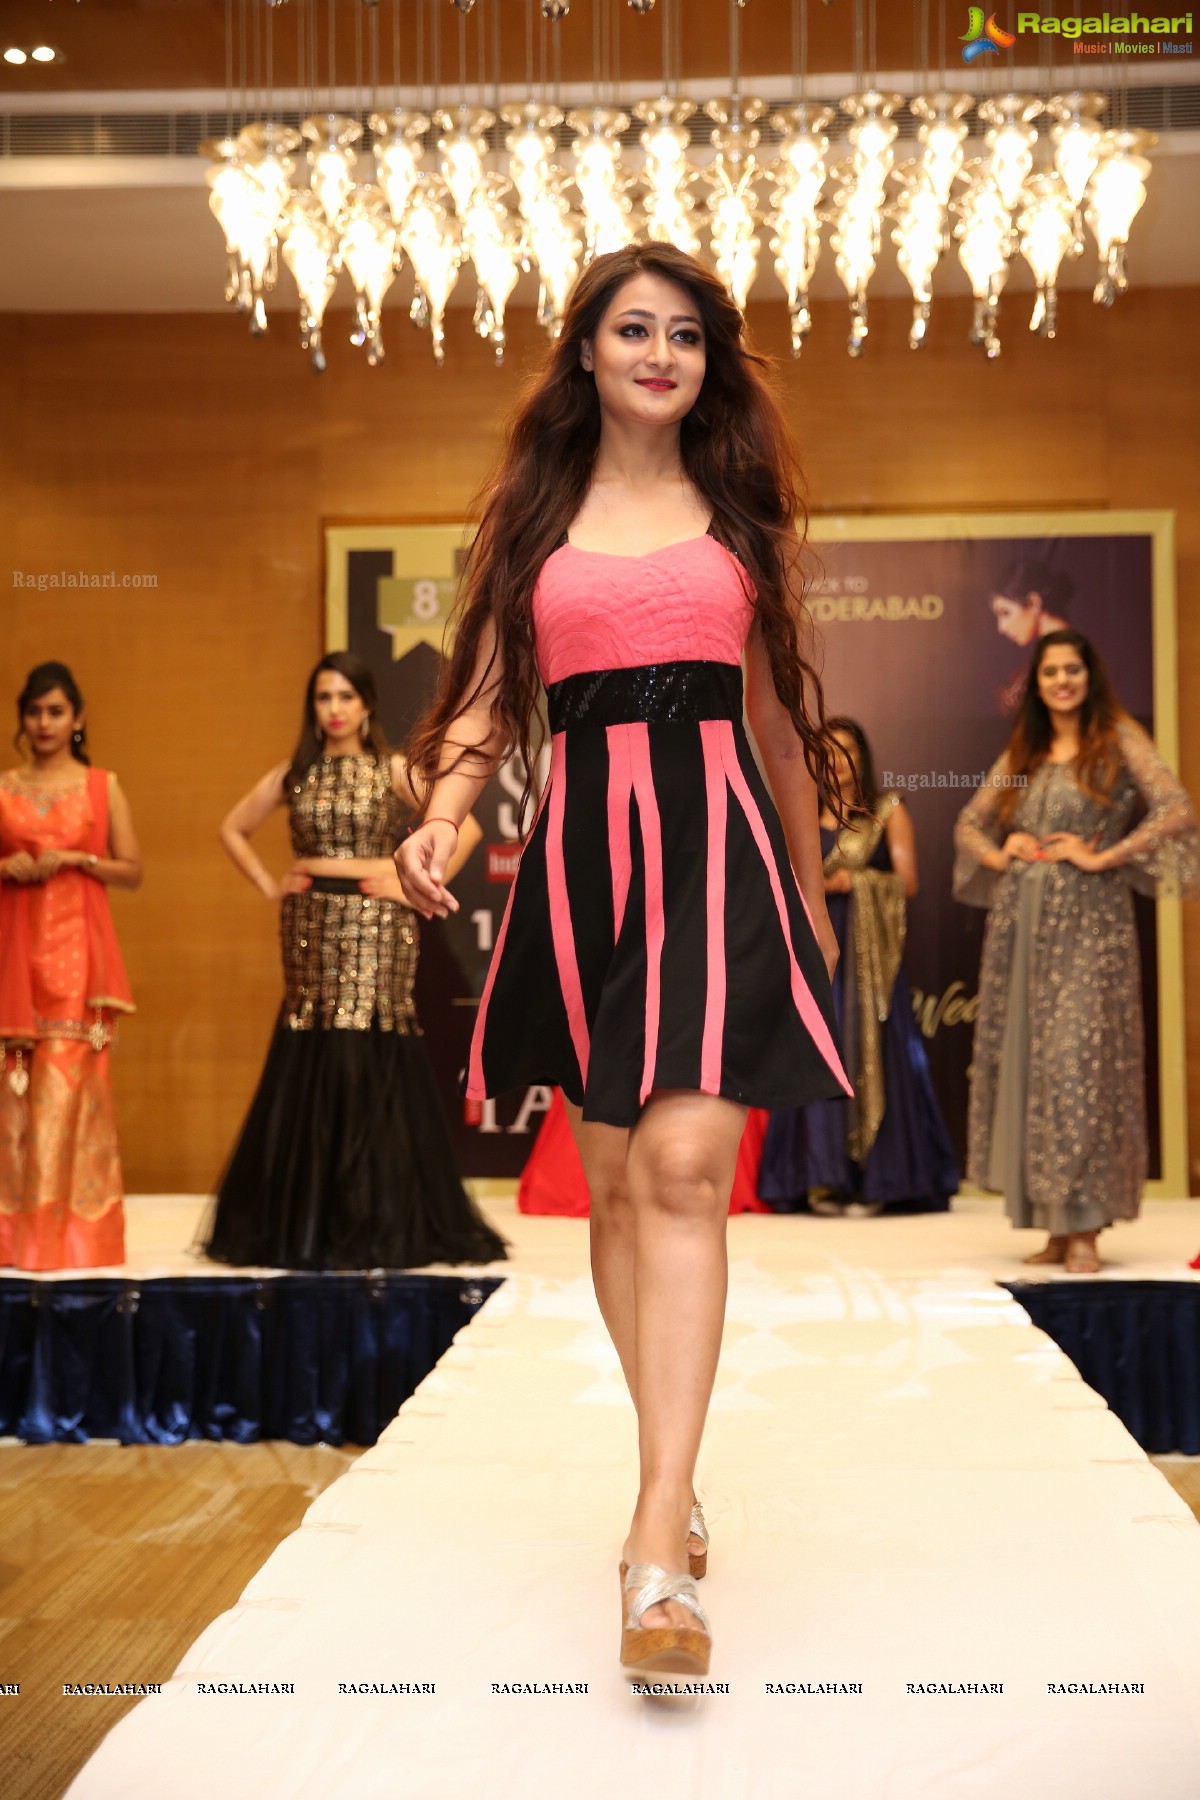 Sutraa Lifestyle and Fashion Exhibition Curtain Raiser Oct 2018 at Hotel Marigold